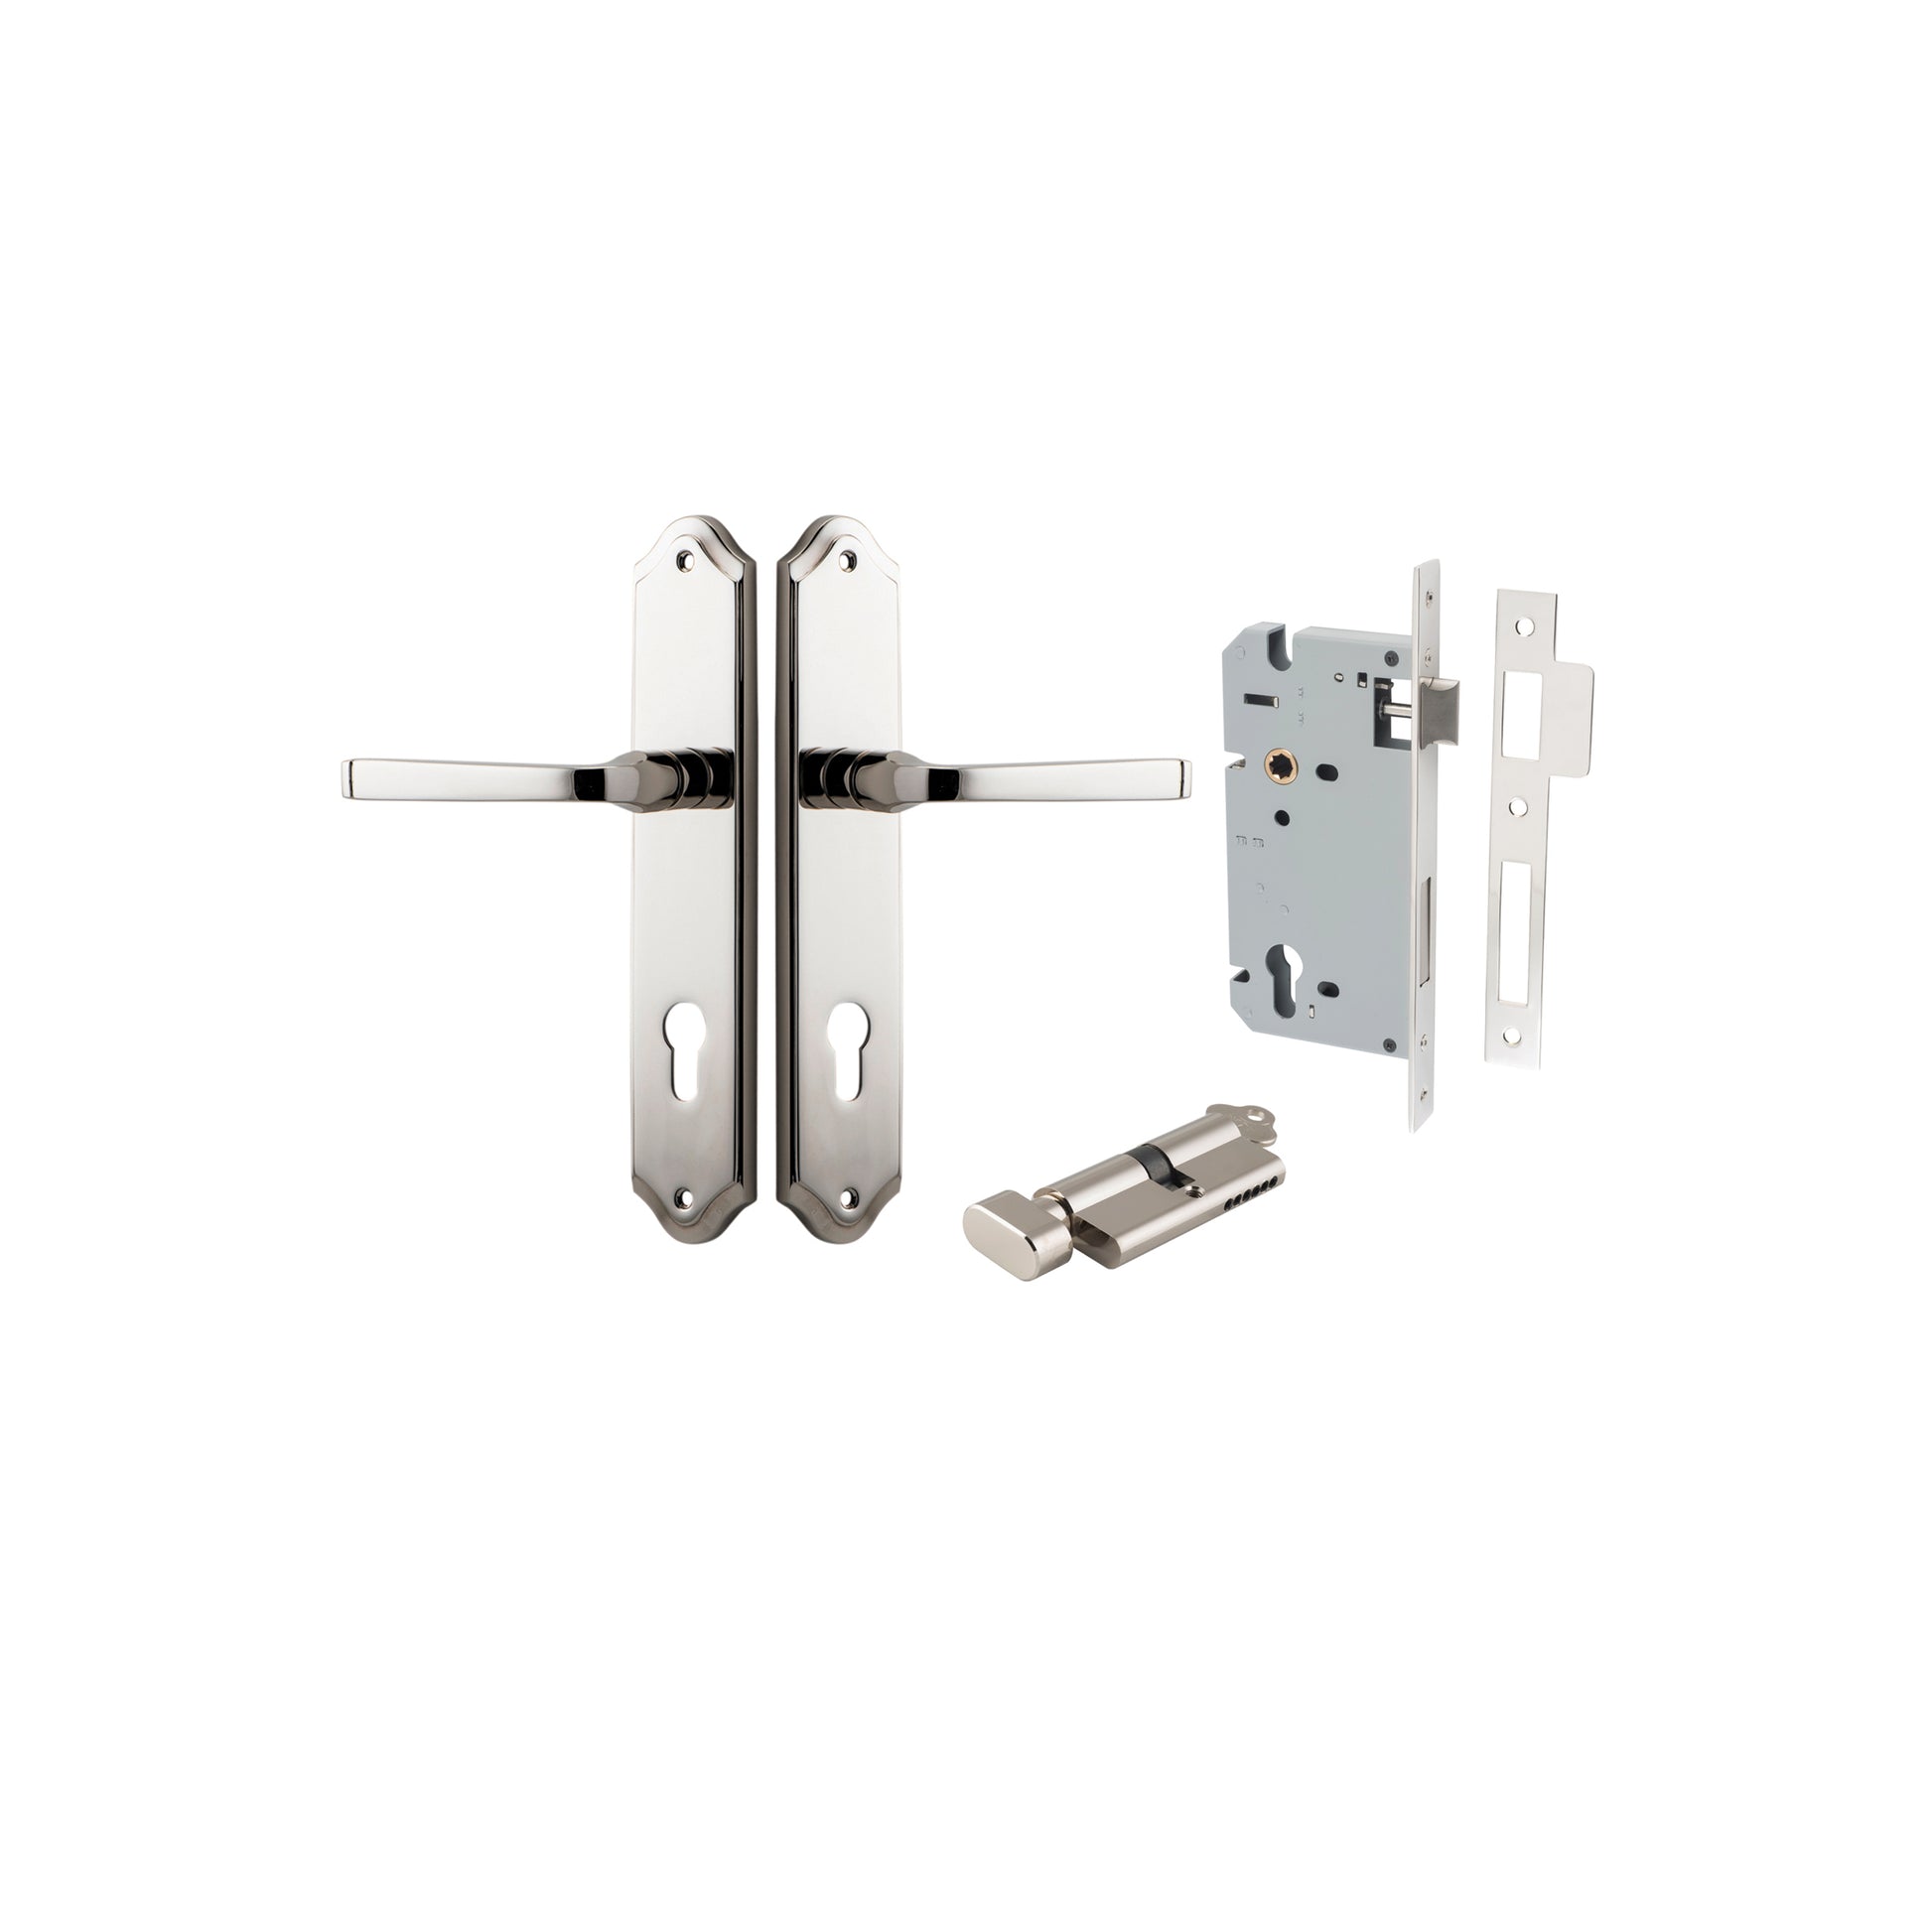 Door Lever Annecy Shouldered Euro Polished Nickel CTC85mm H240xW50xP65mm Entrance Kit, Mortice Lock Euro Polished Nickel CTC85mm Backset 60mm, Euro Cylinder Key Thumb 6 Pin Polished Nickel L70mm KA1 in Polished Nickel